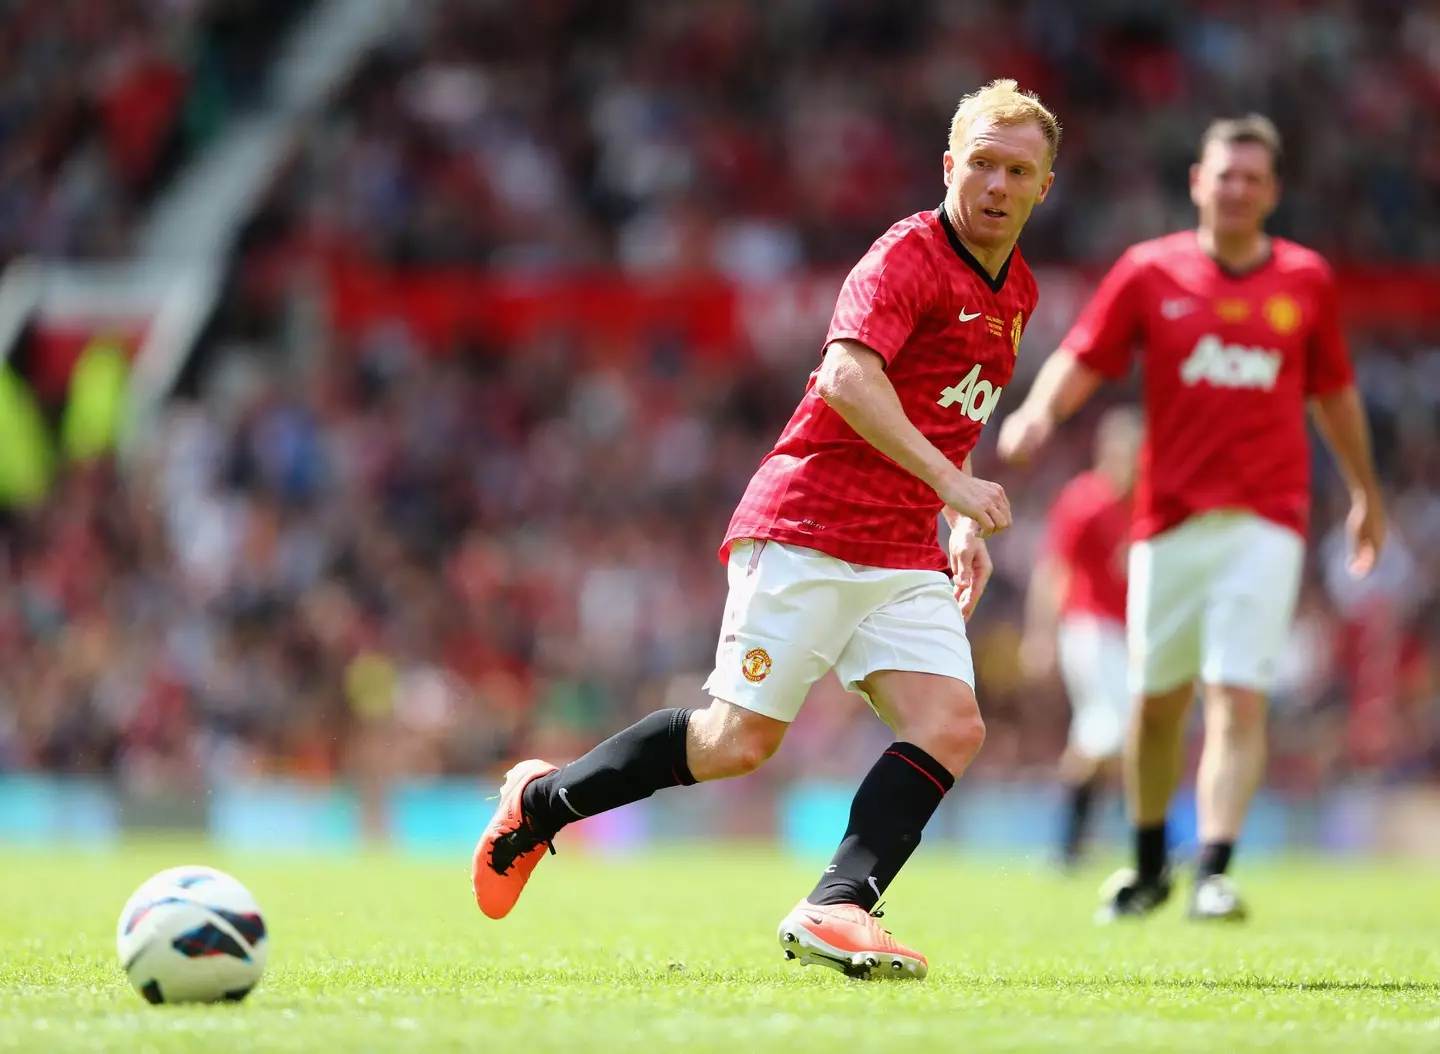 Scholes during his second spell with United. (Image